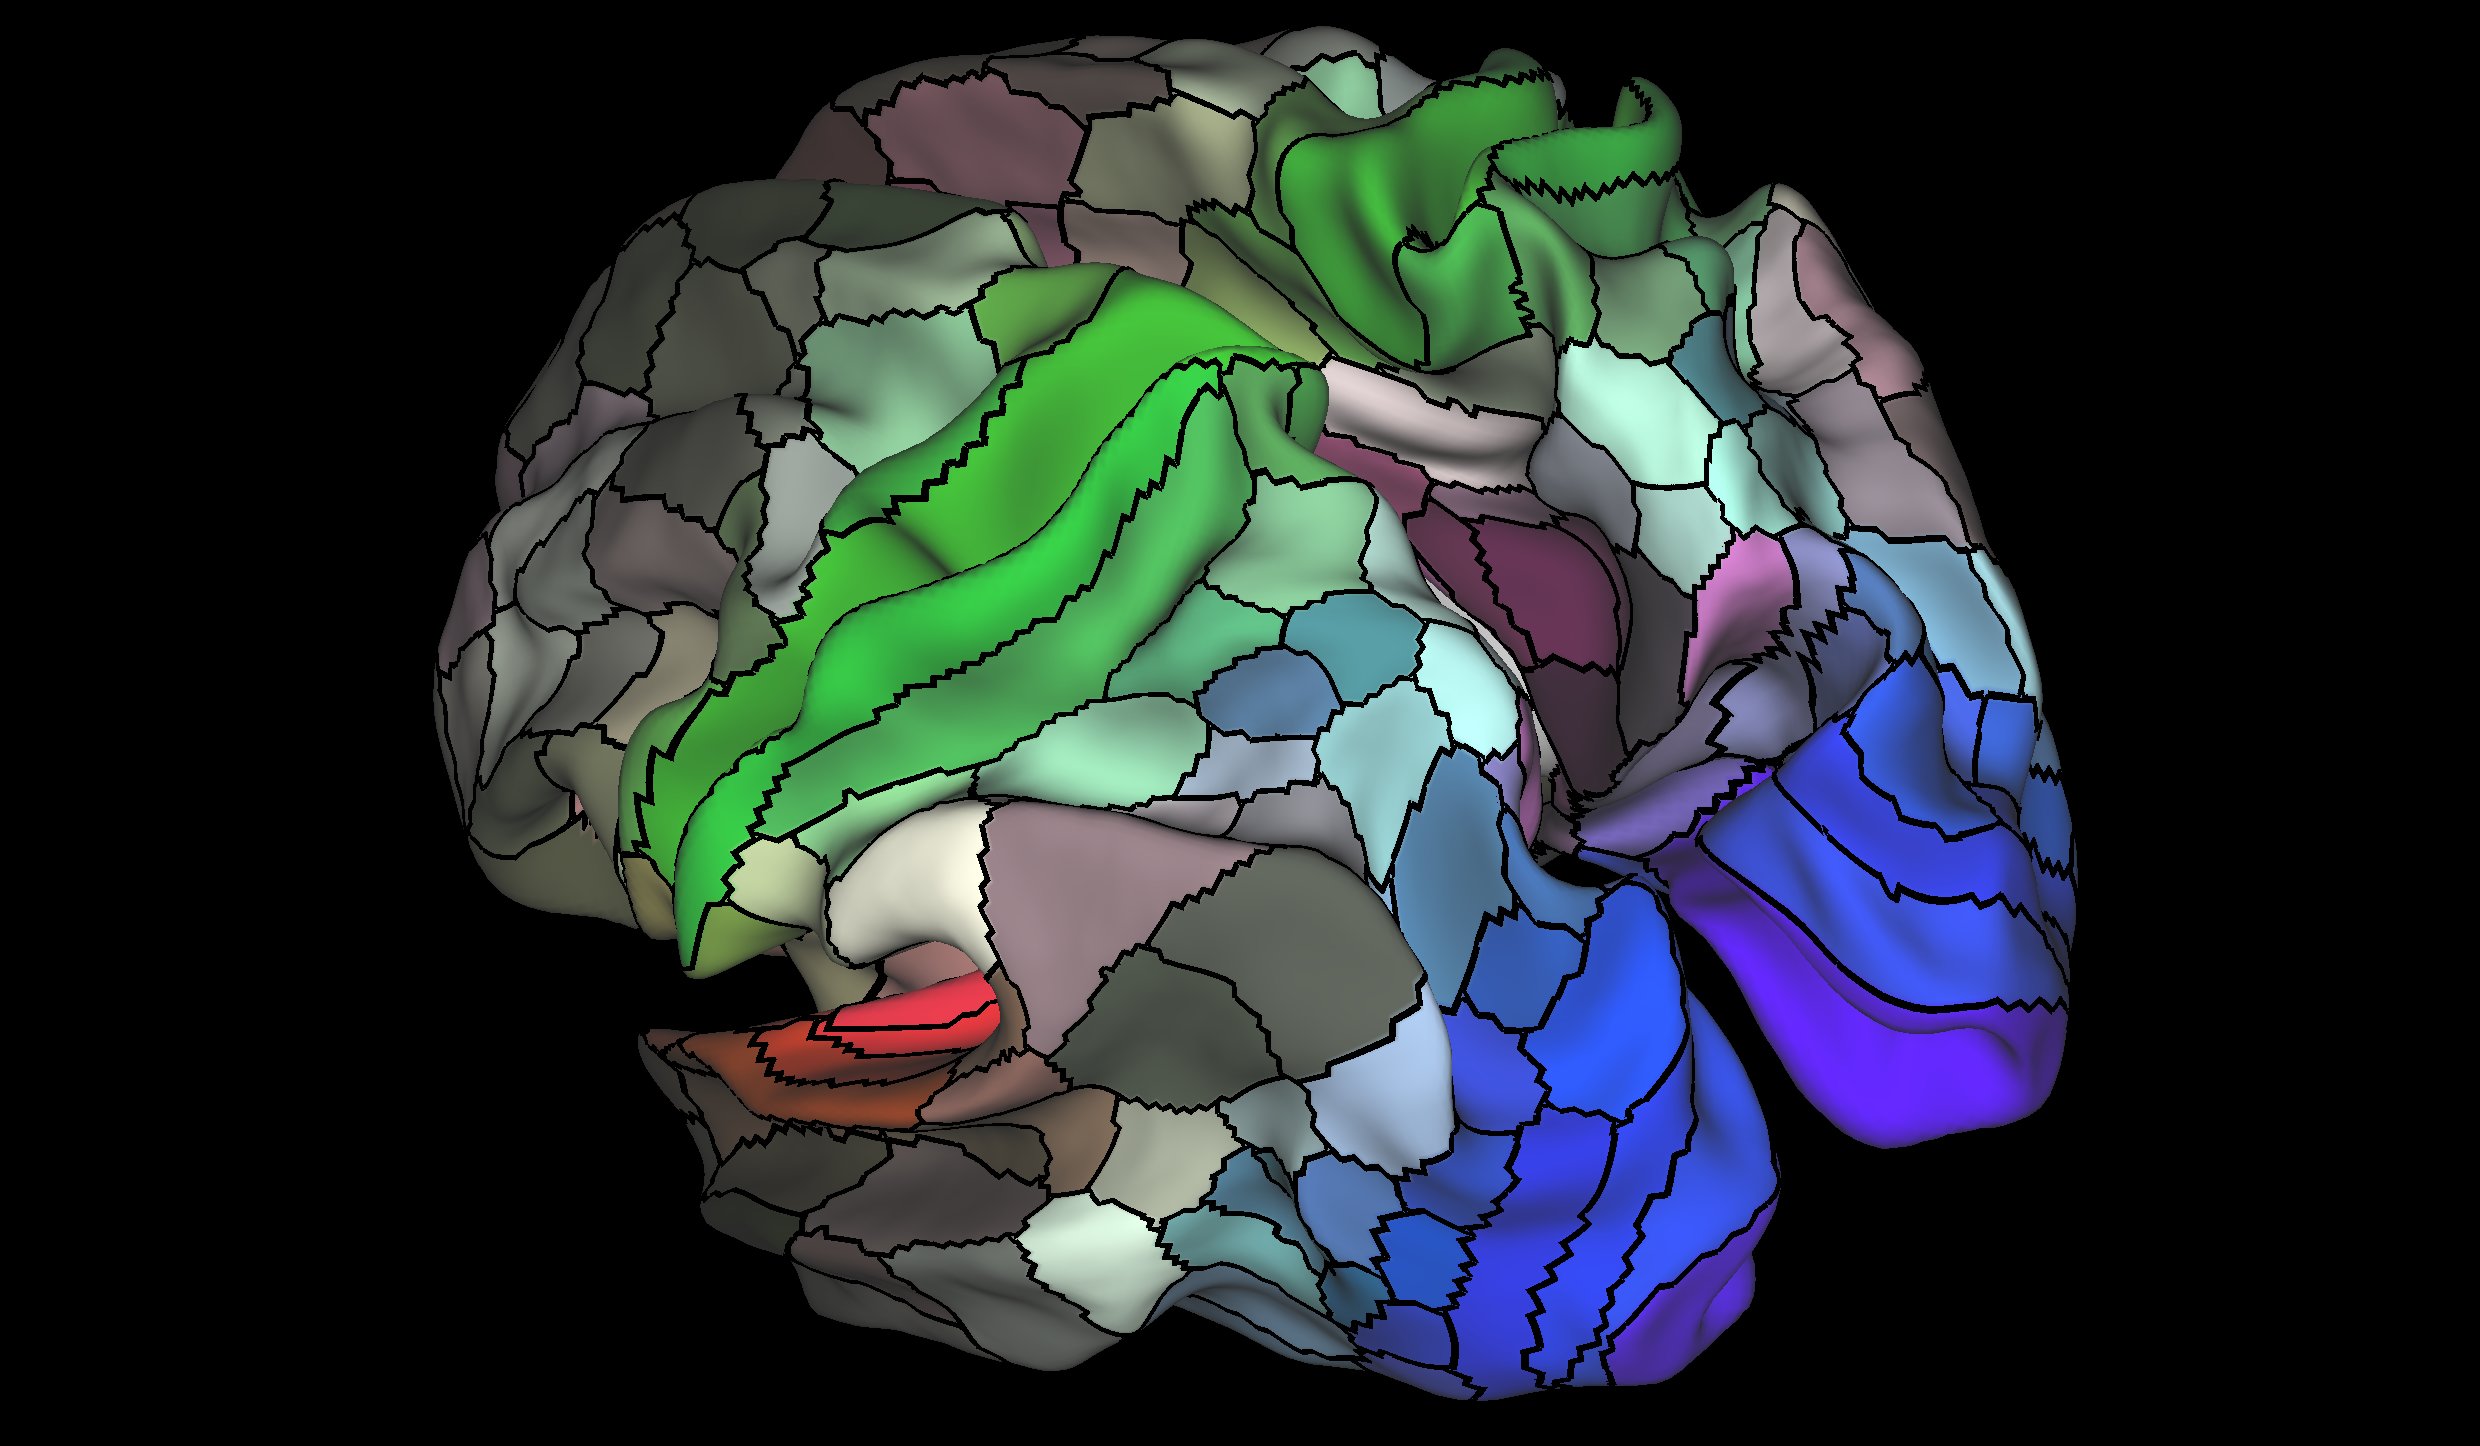 This New, Ultra-Detailed Map Of The Brain Could Change Medicine